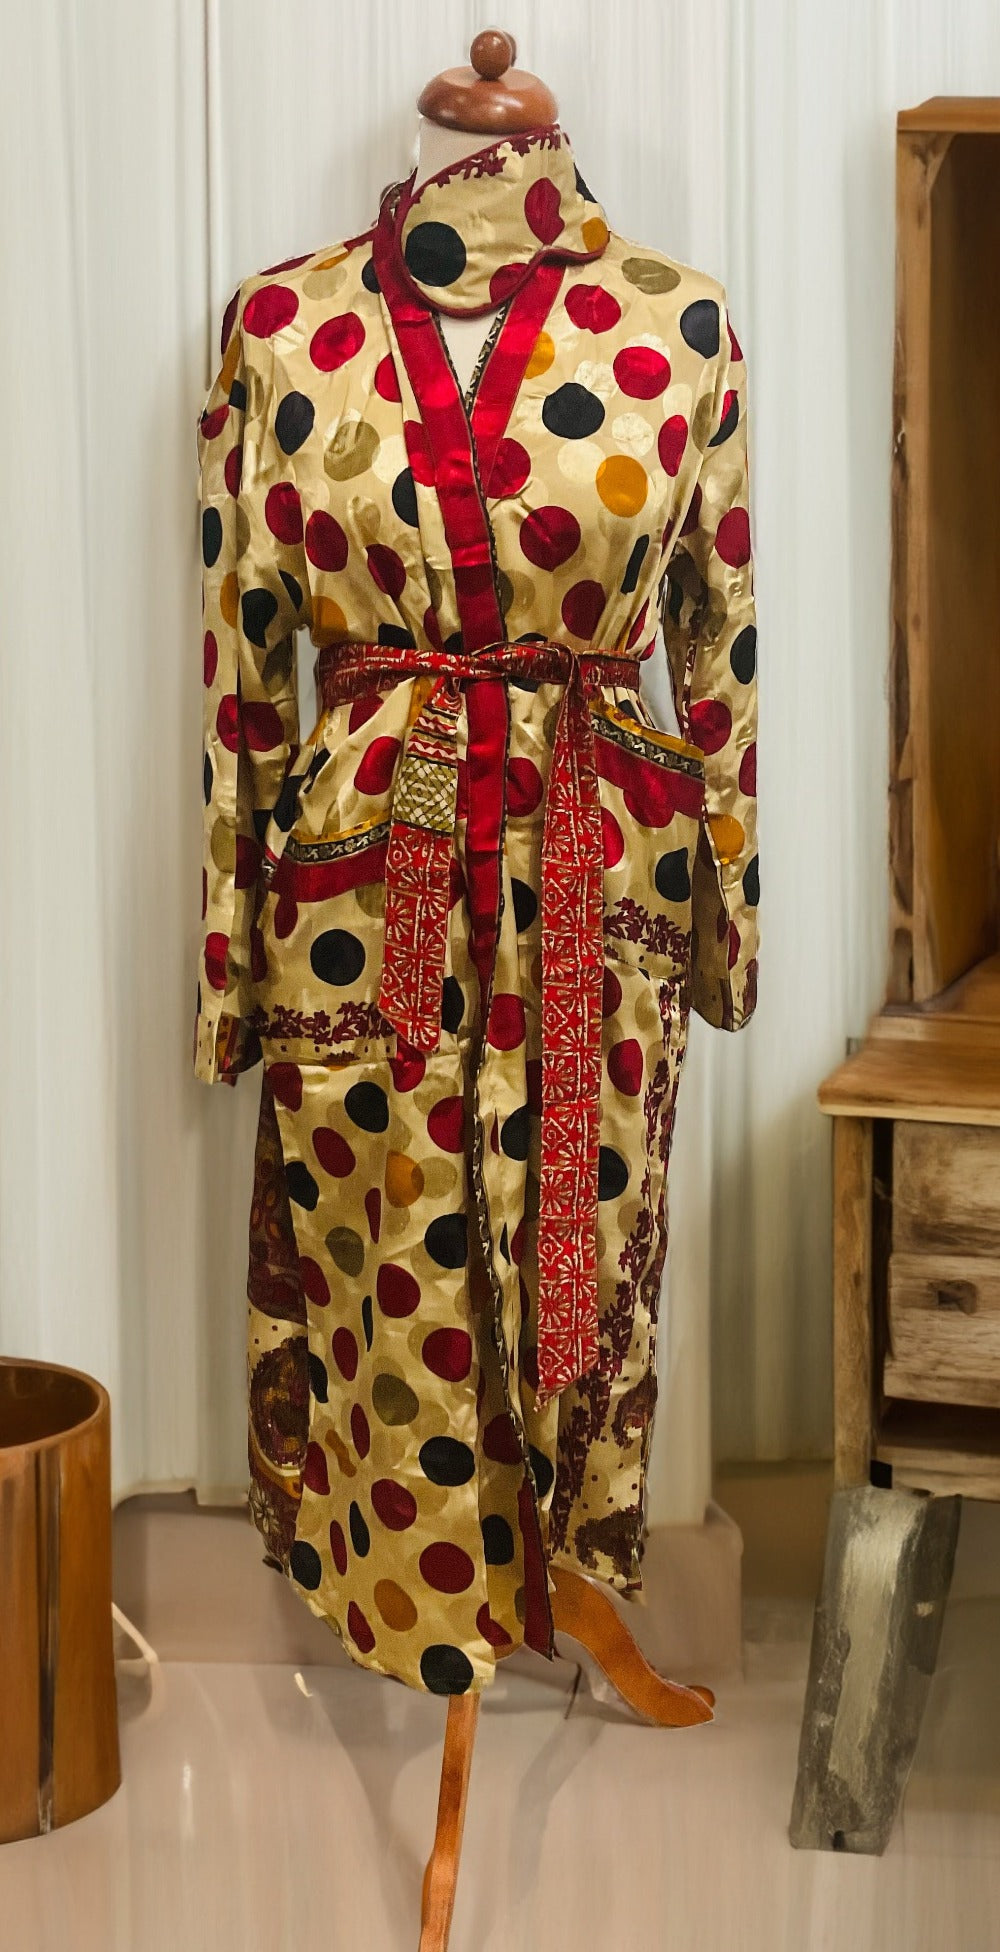 Polka Dot Recycled Sari Robe Dressing Gown Second Nature Online